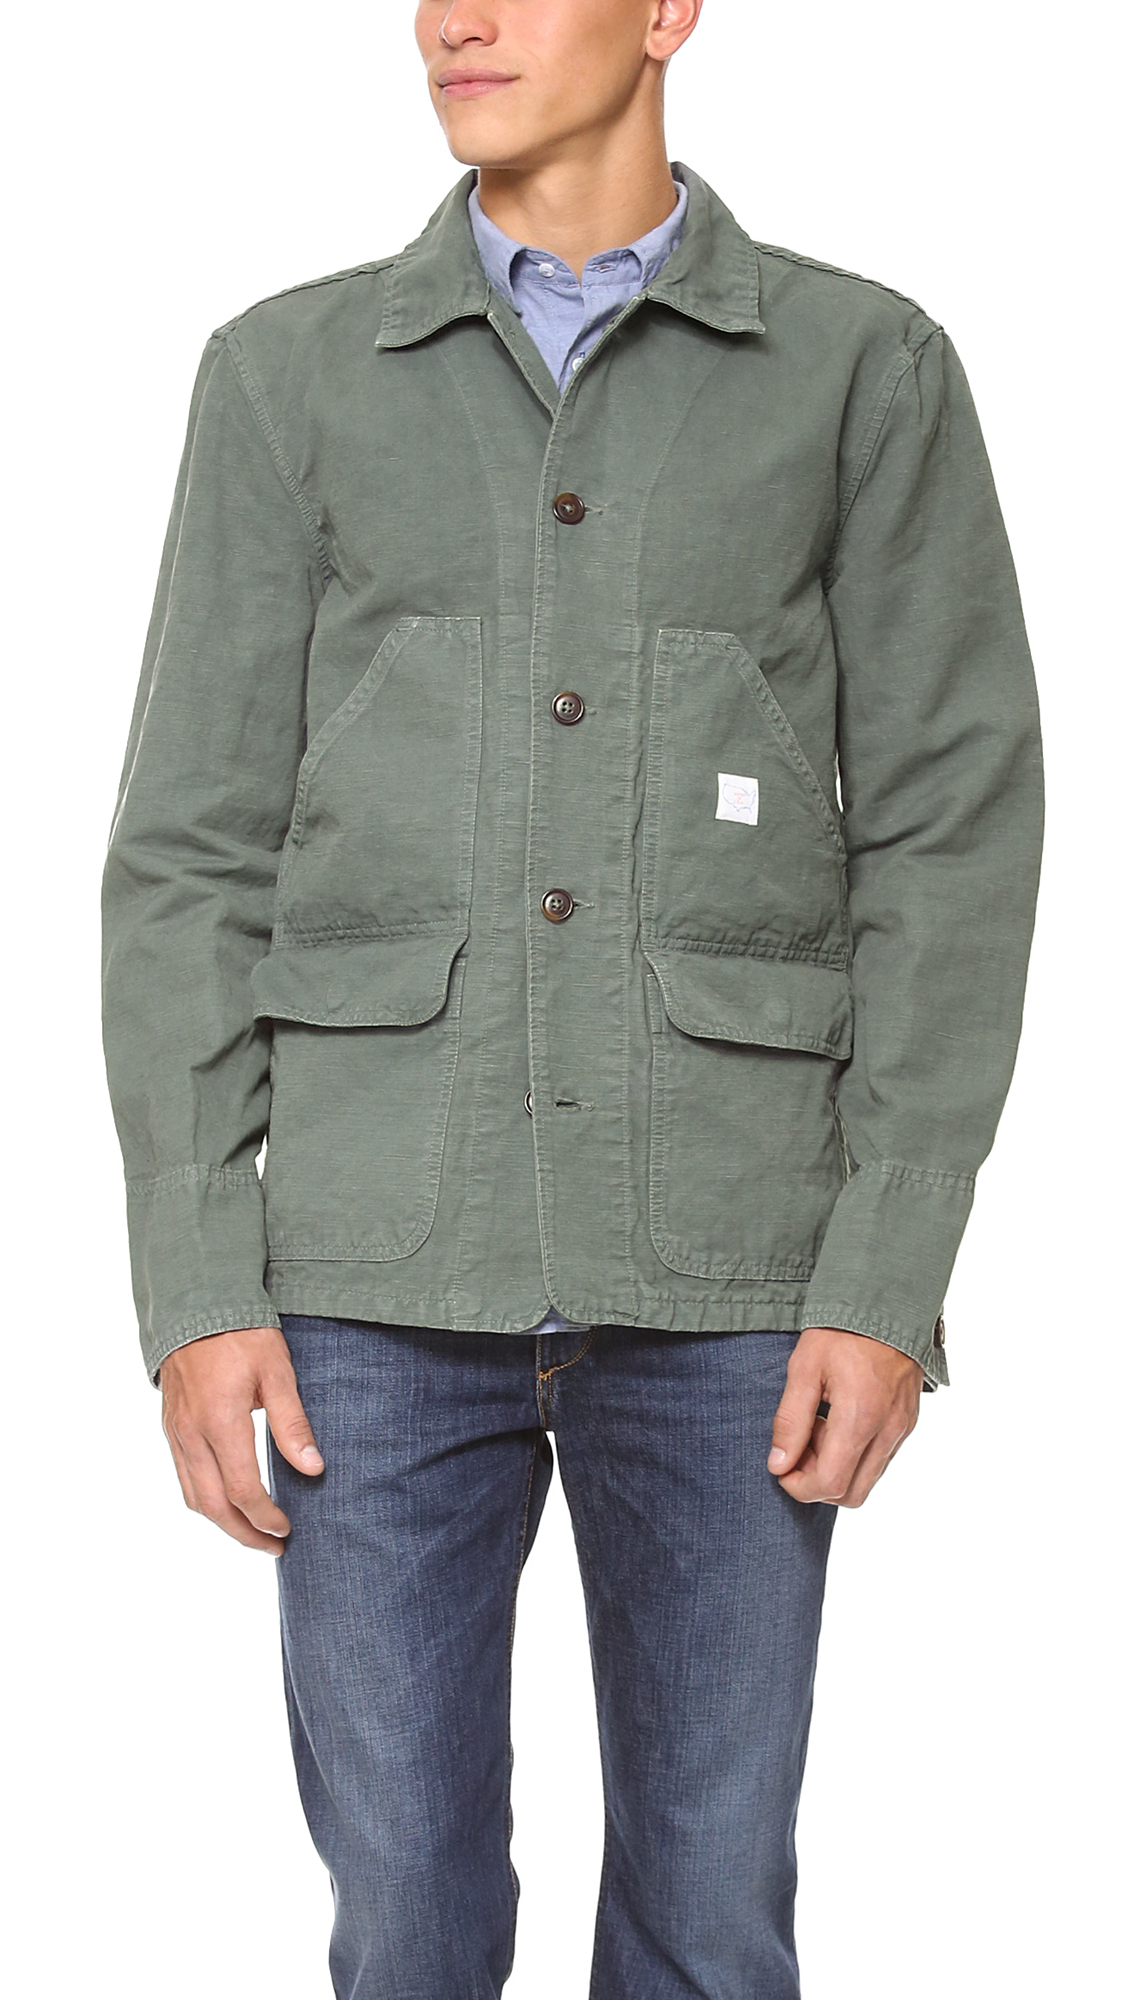 Lyst - Save Khaki Shop Jacket in Green for Men